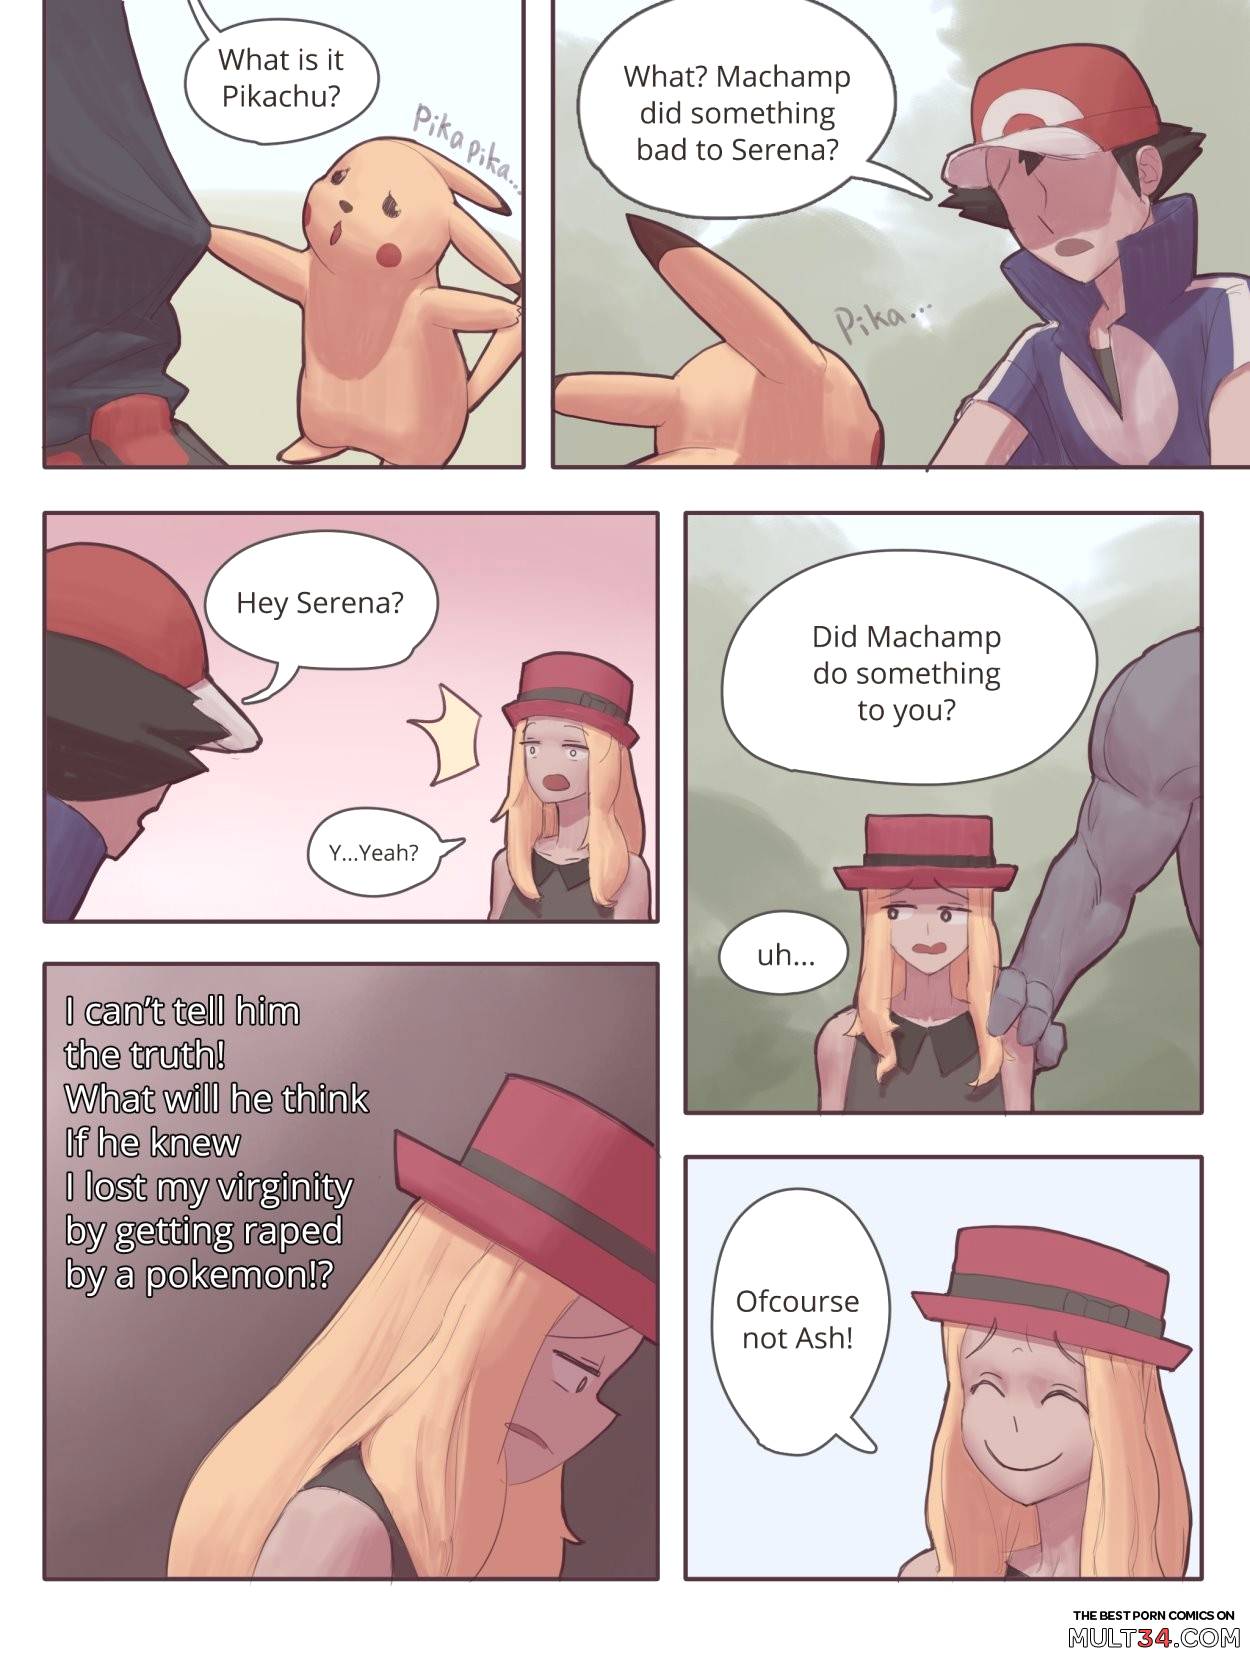 Machamp Used Knock Up! Ch. 3 - Serena page 8